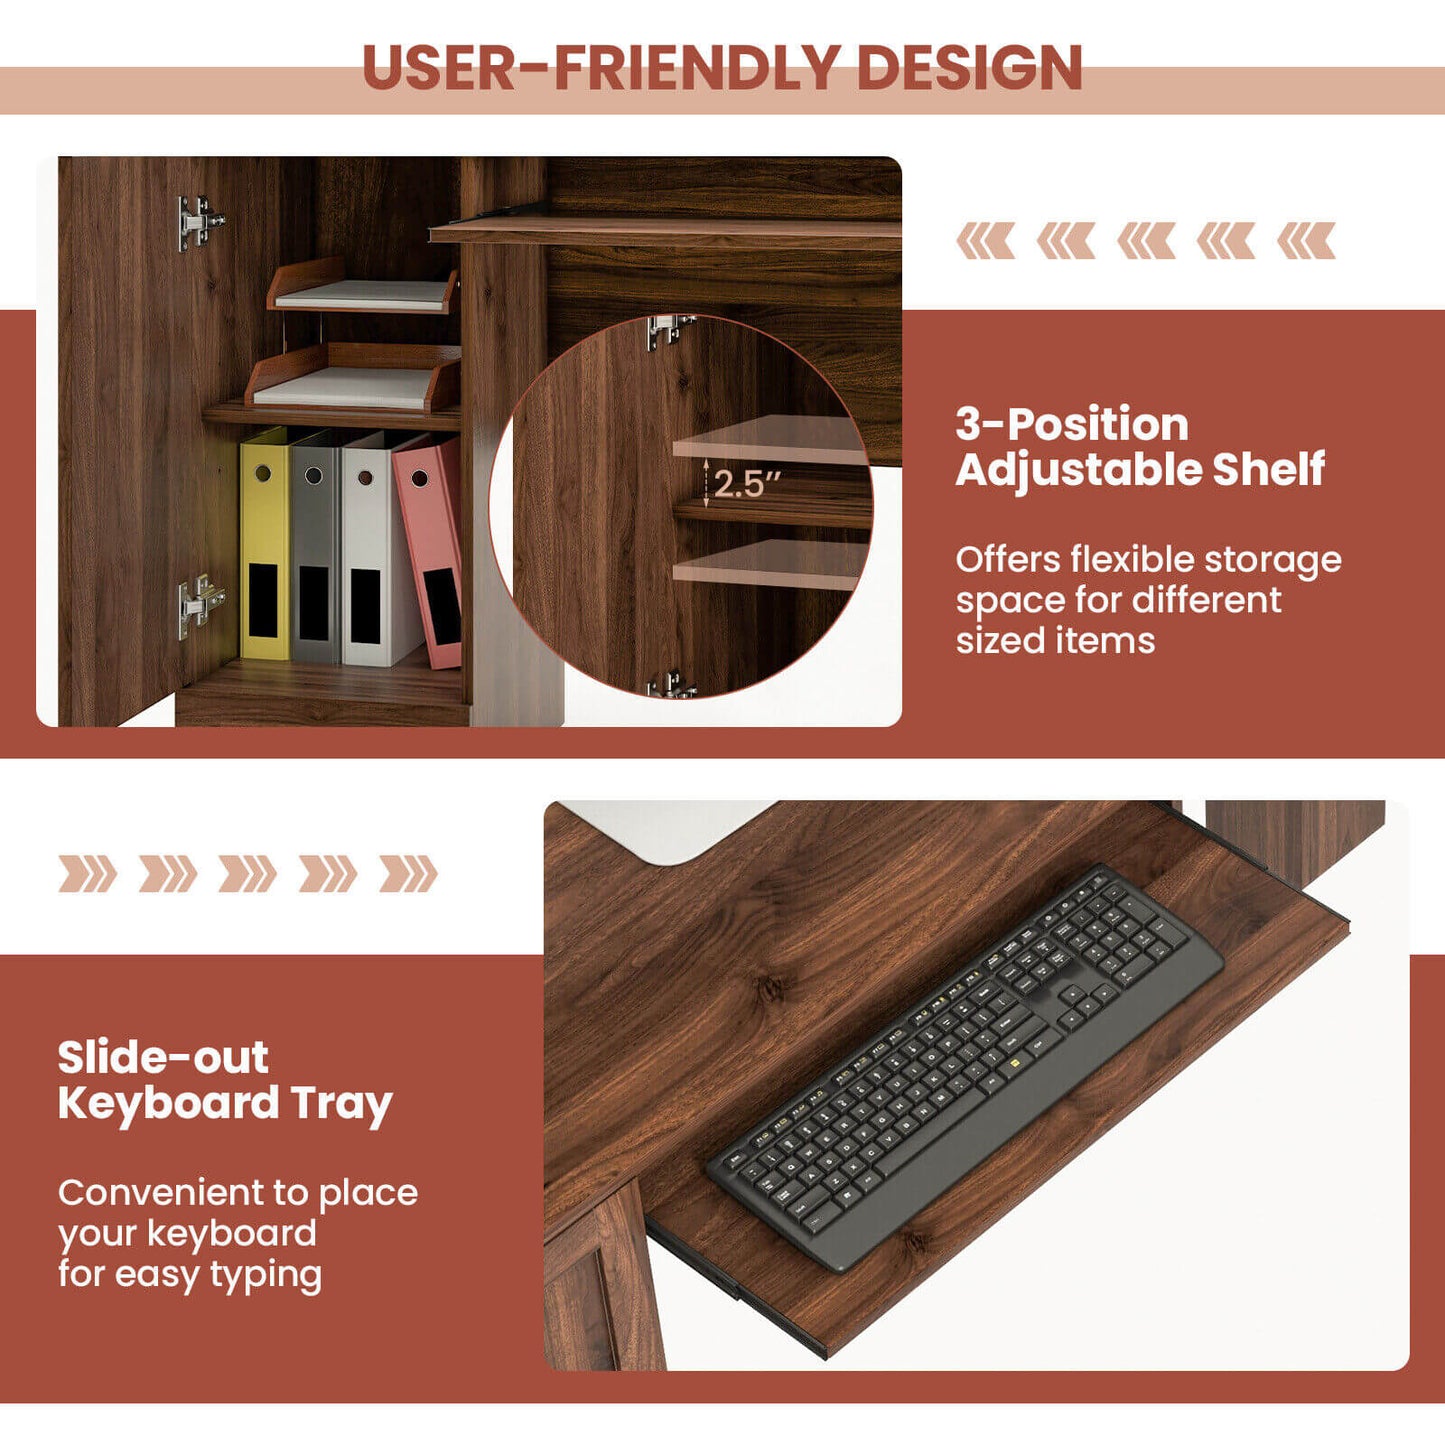 L-Shaped Office Desk with Storage Drawers and Keyboard Tray, Walnut - Gallery Canada